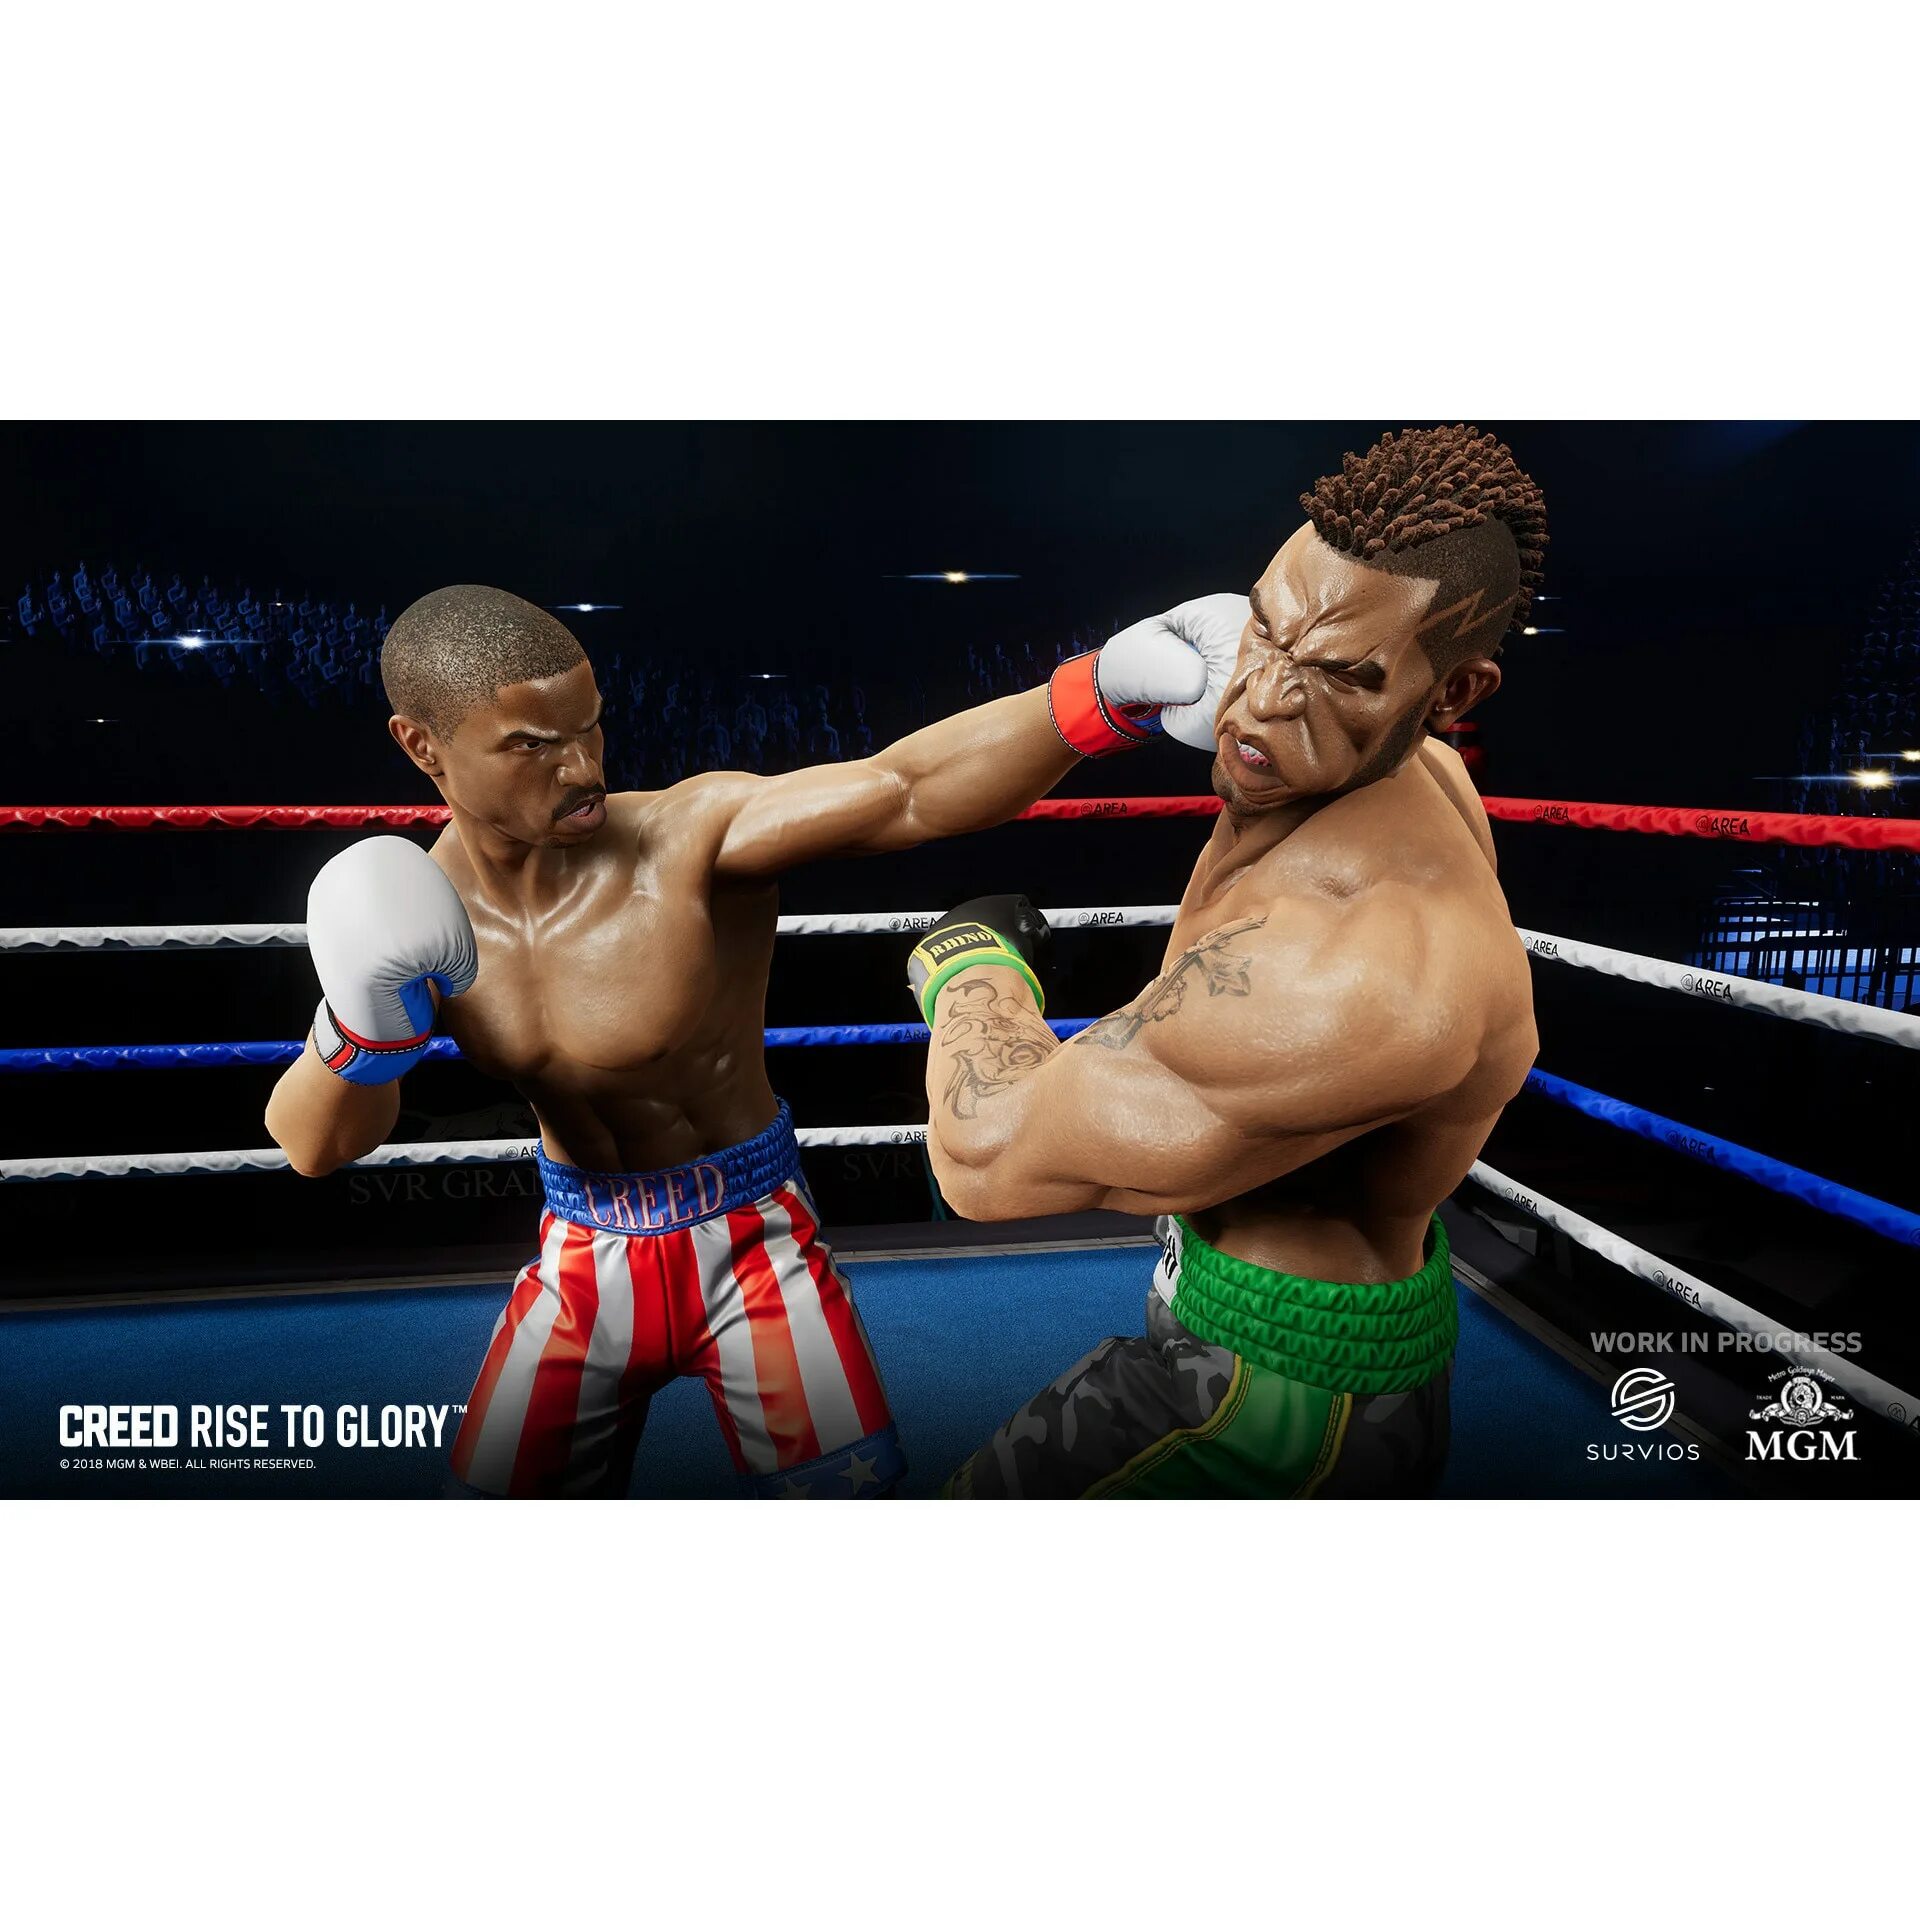 Creed glory vr. Creed Rise to Glory. Creed Rise to Glory VR. Big Rumble Boxing: Creed Champions. Big Rumble Boxing: Creed Champions ps4.